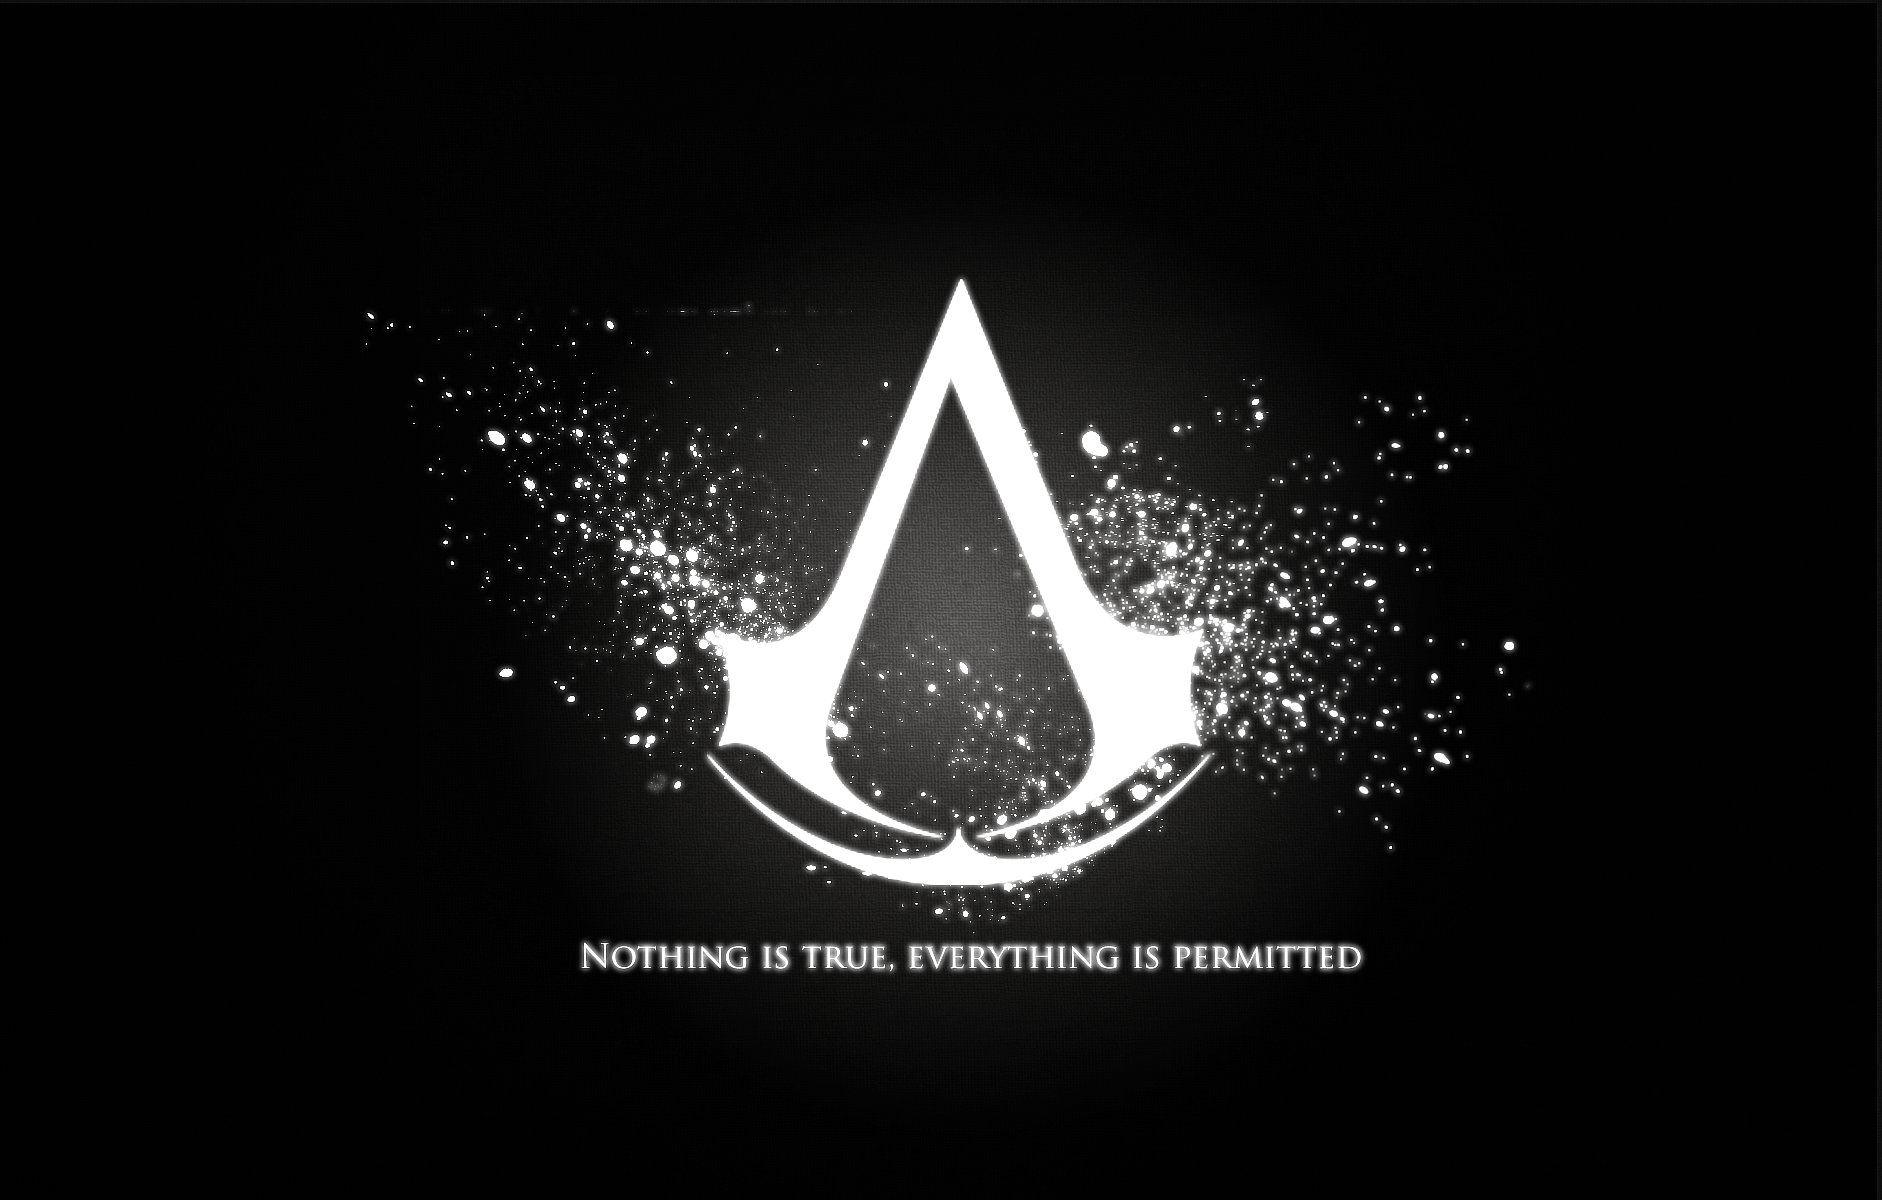 assassin's creed, video game, logo, quote